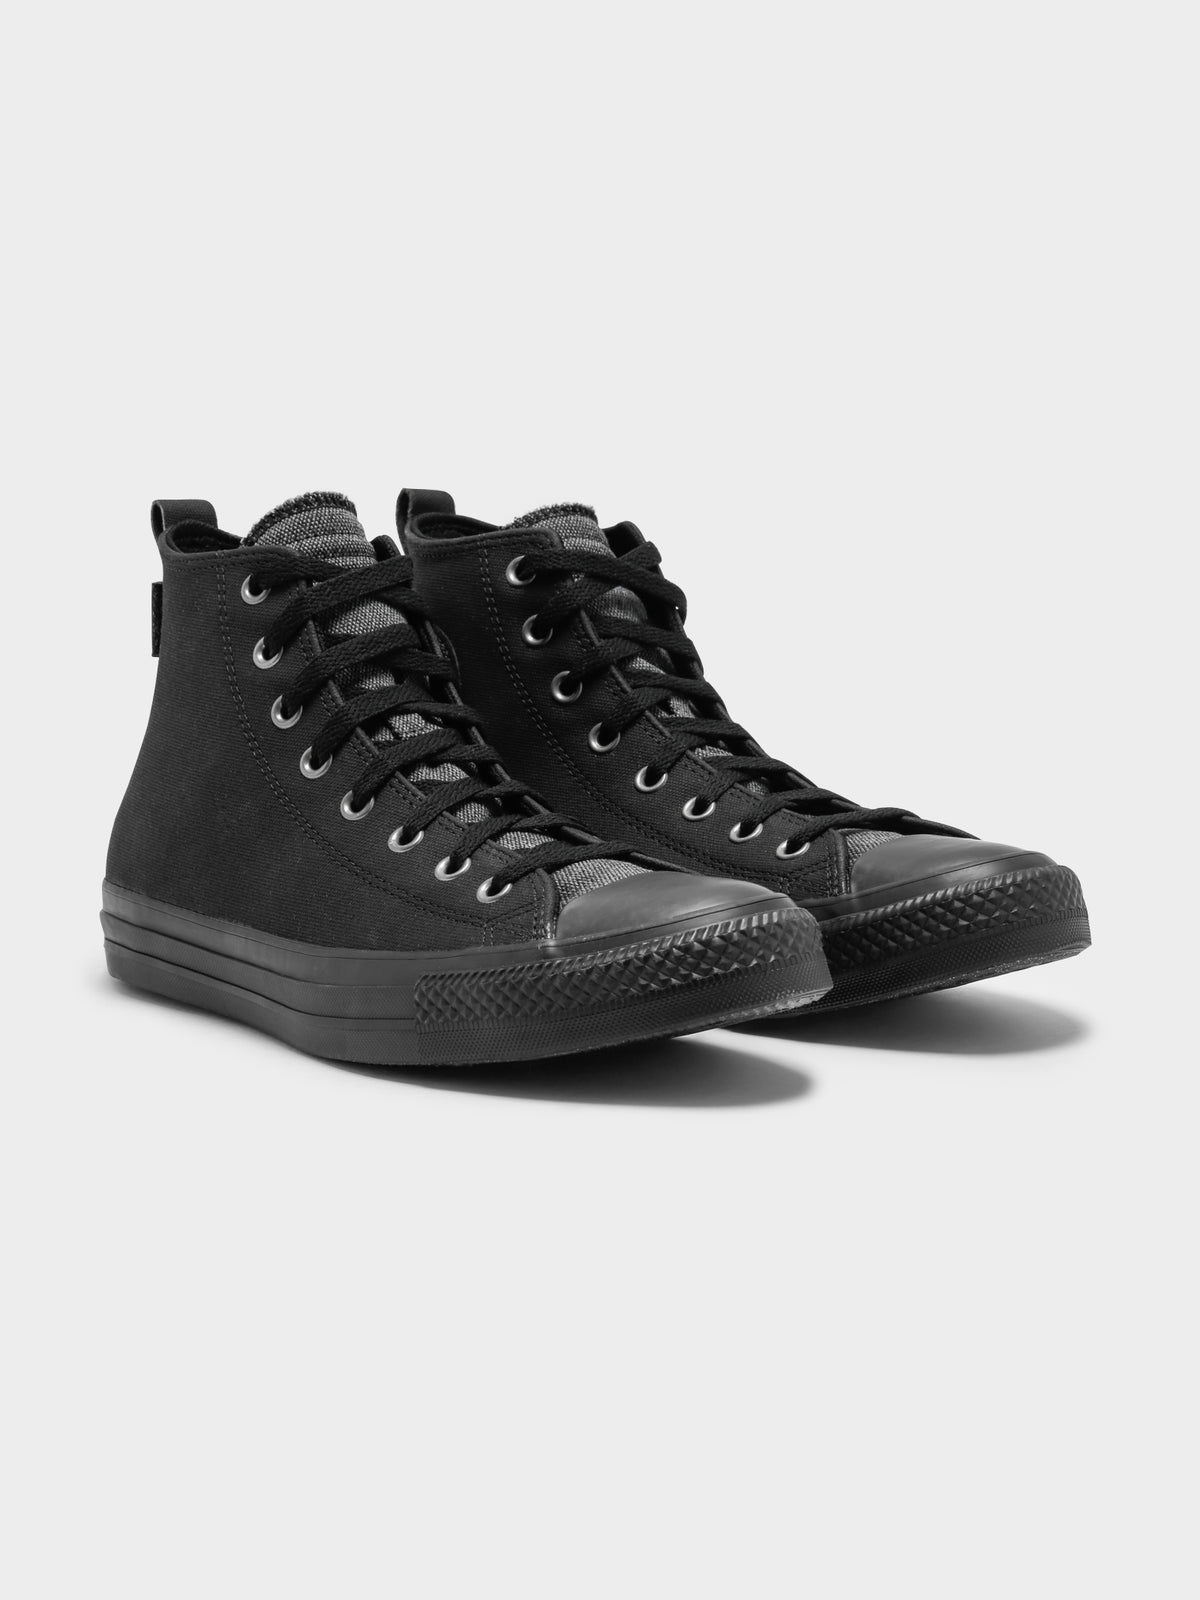 Unisex Converse Chuck Taylor All Star Tec-Tuff Water Resistant High Top in Black